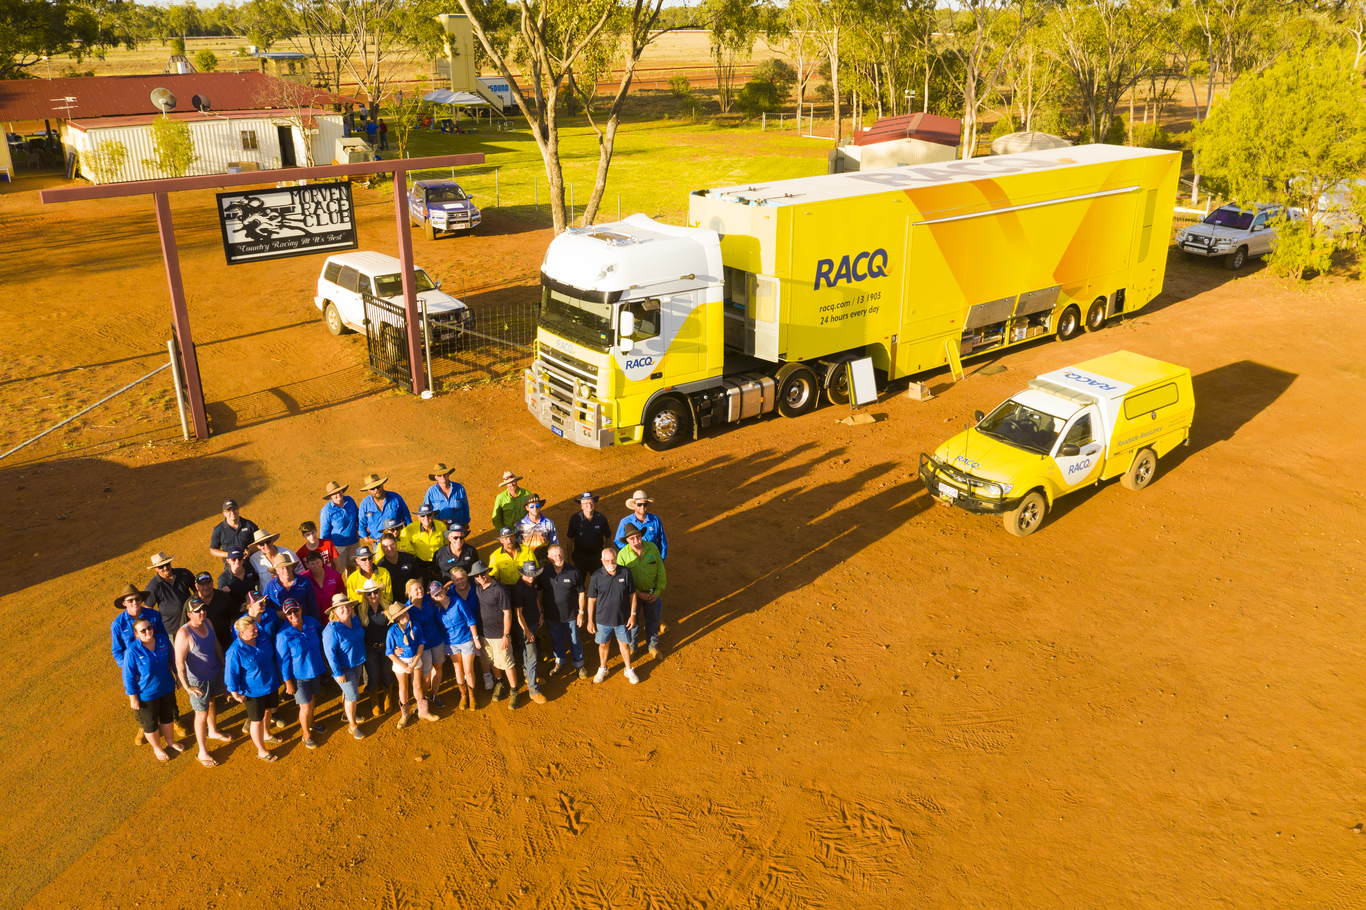 racq-people-standing-in-front-of-truck